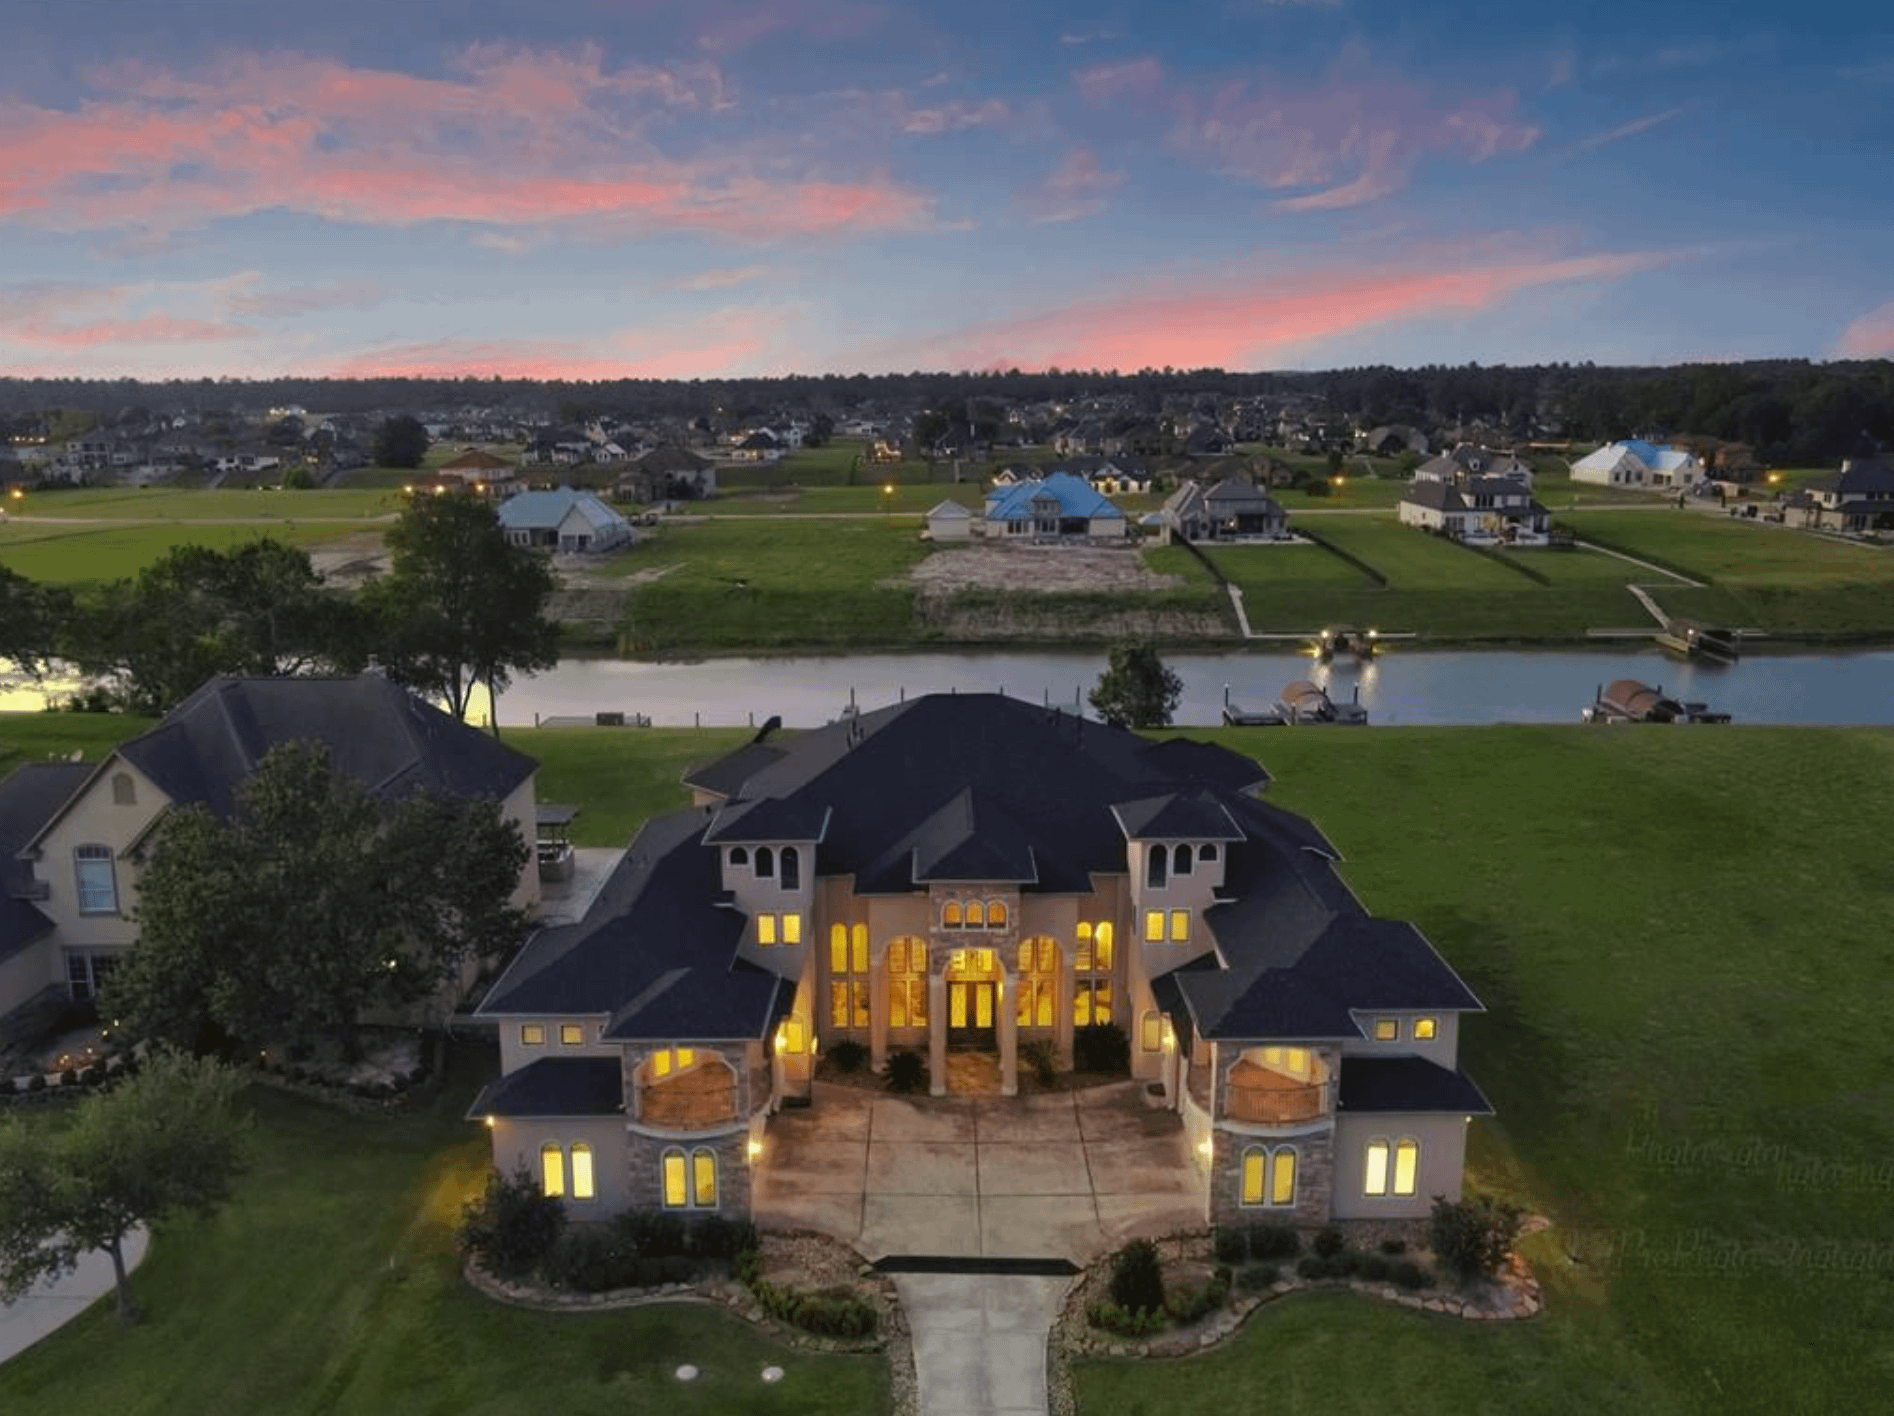 Waterfront Home in Texas With Huge Infinity Pool (PHOTOS)